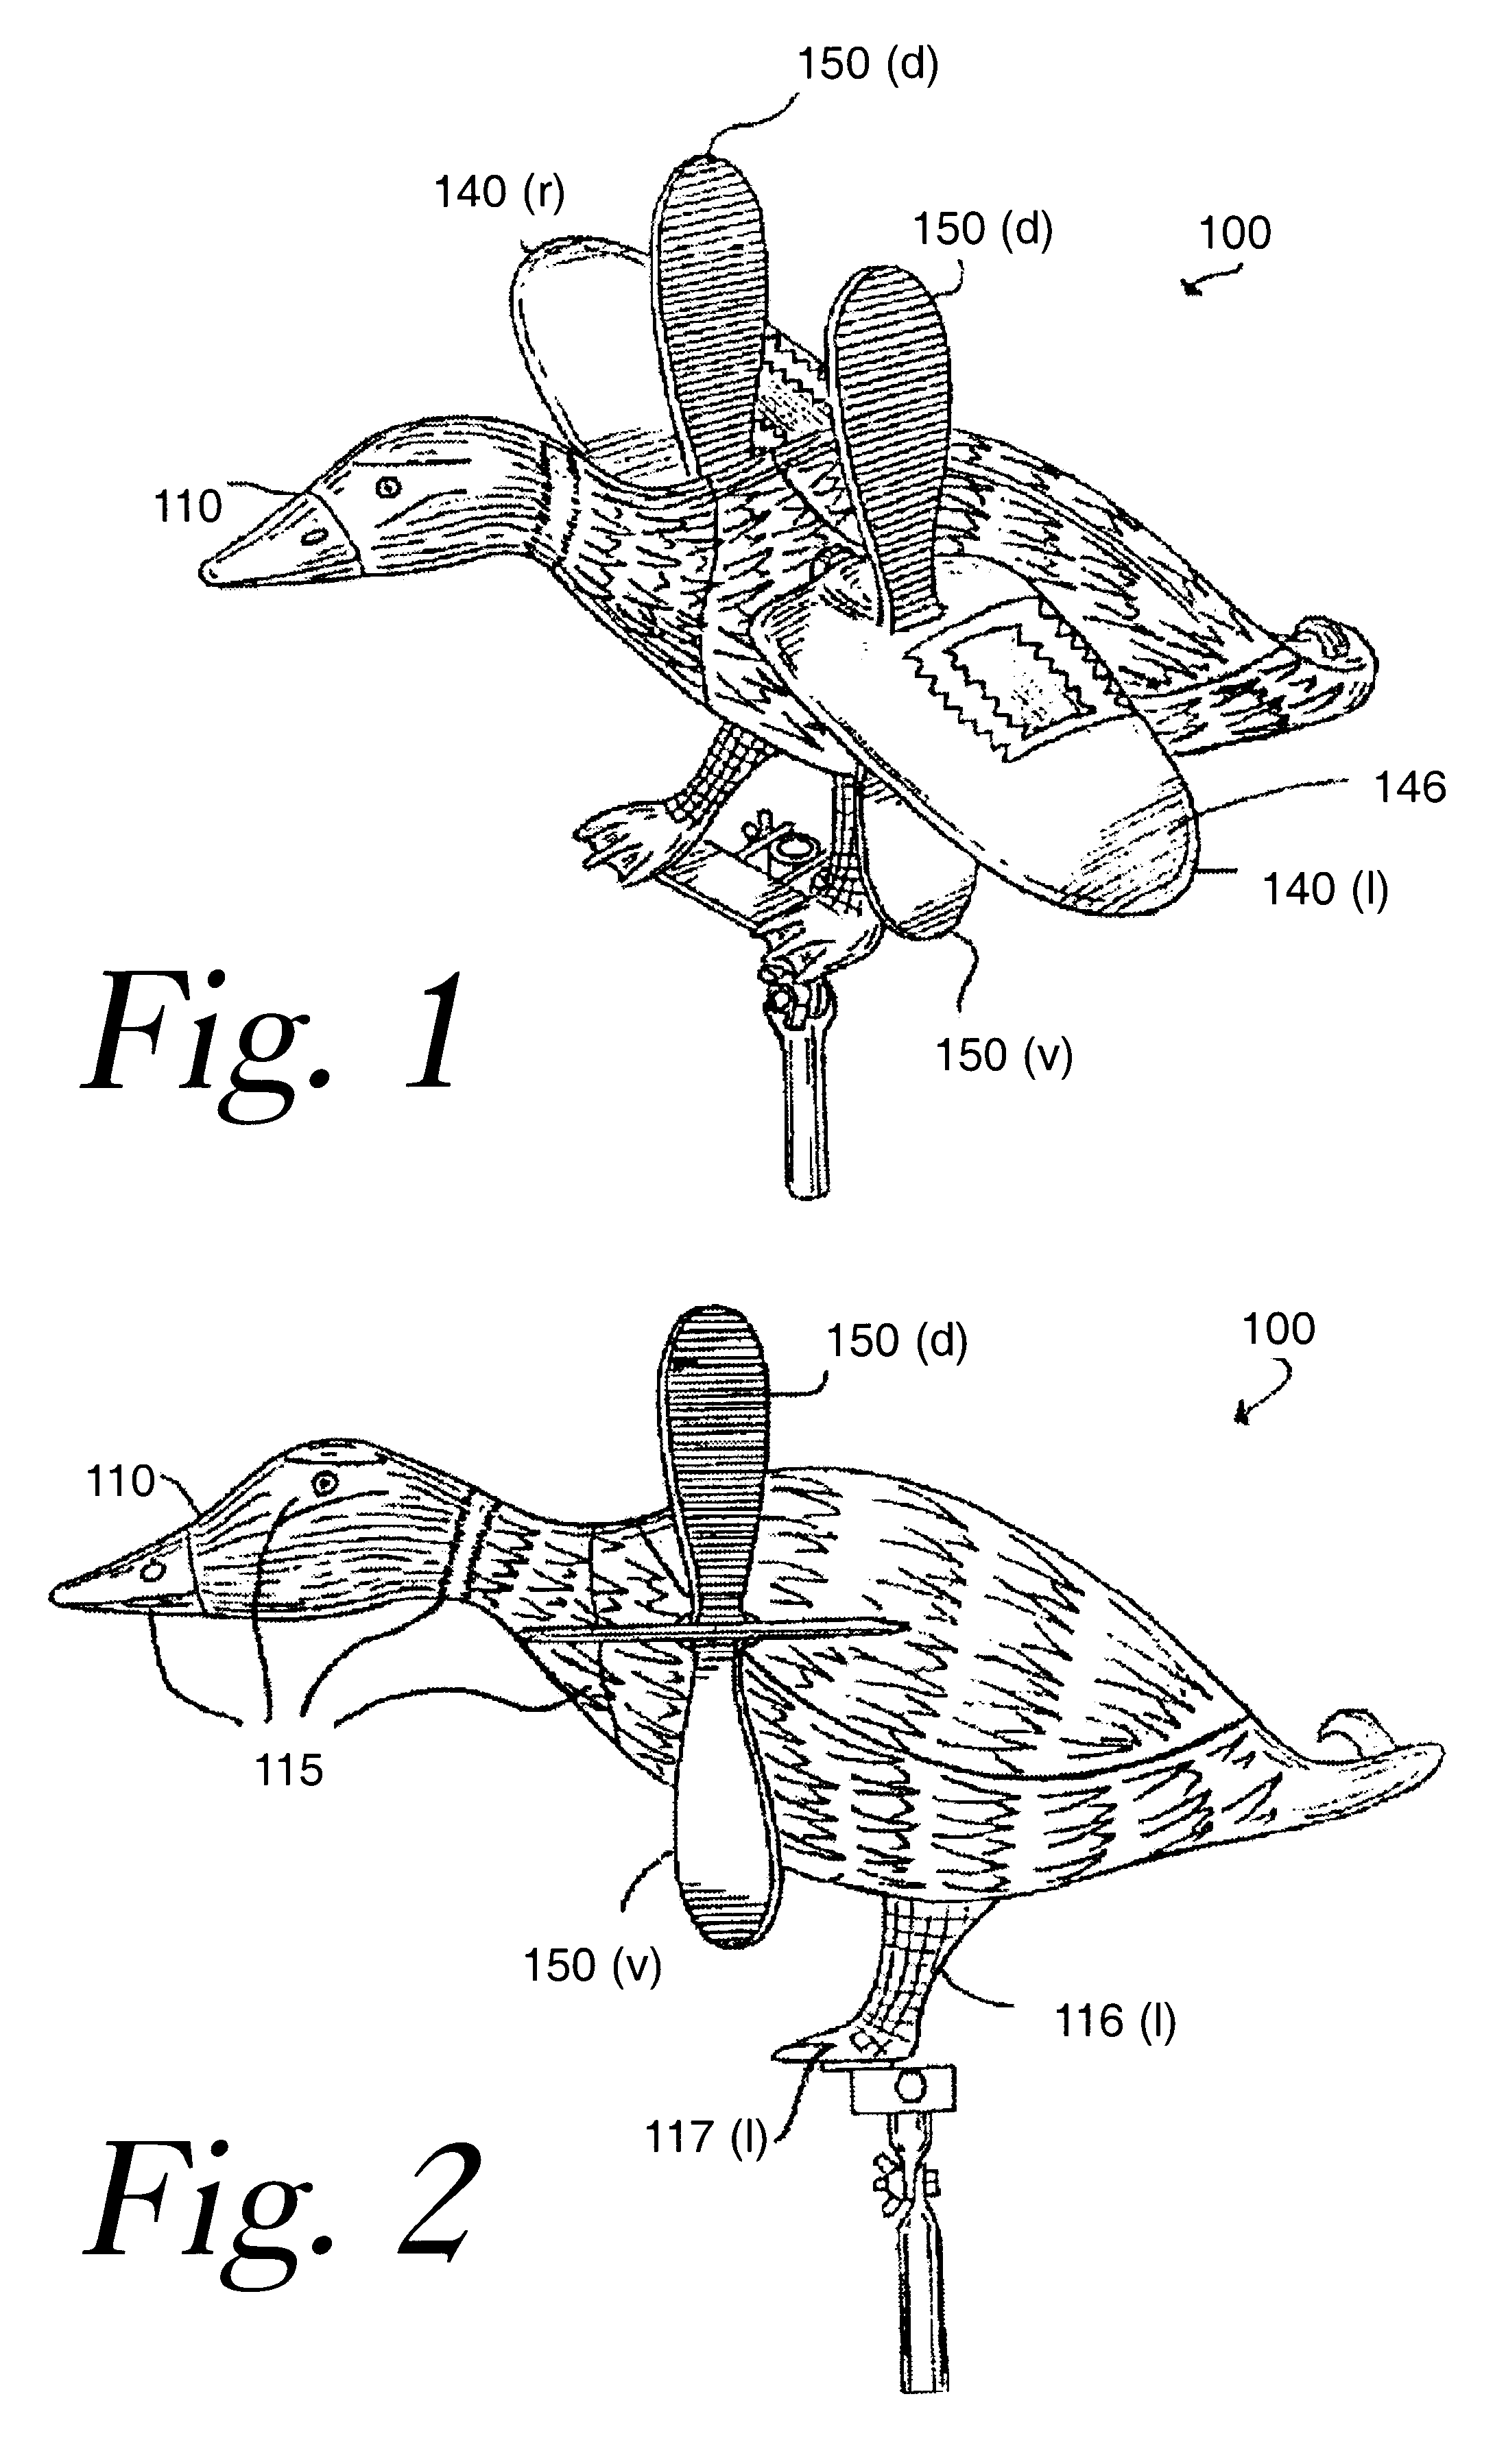 Decoy apparatus with adjustable pitch rotor blade wing assembly